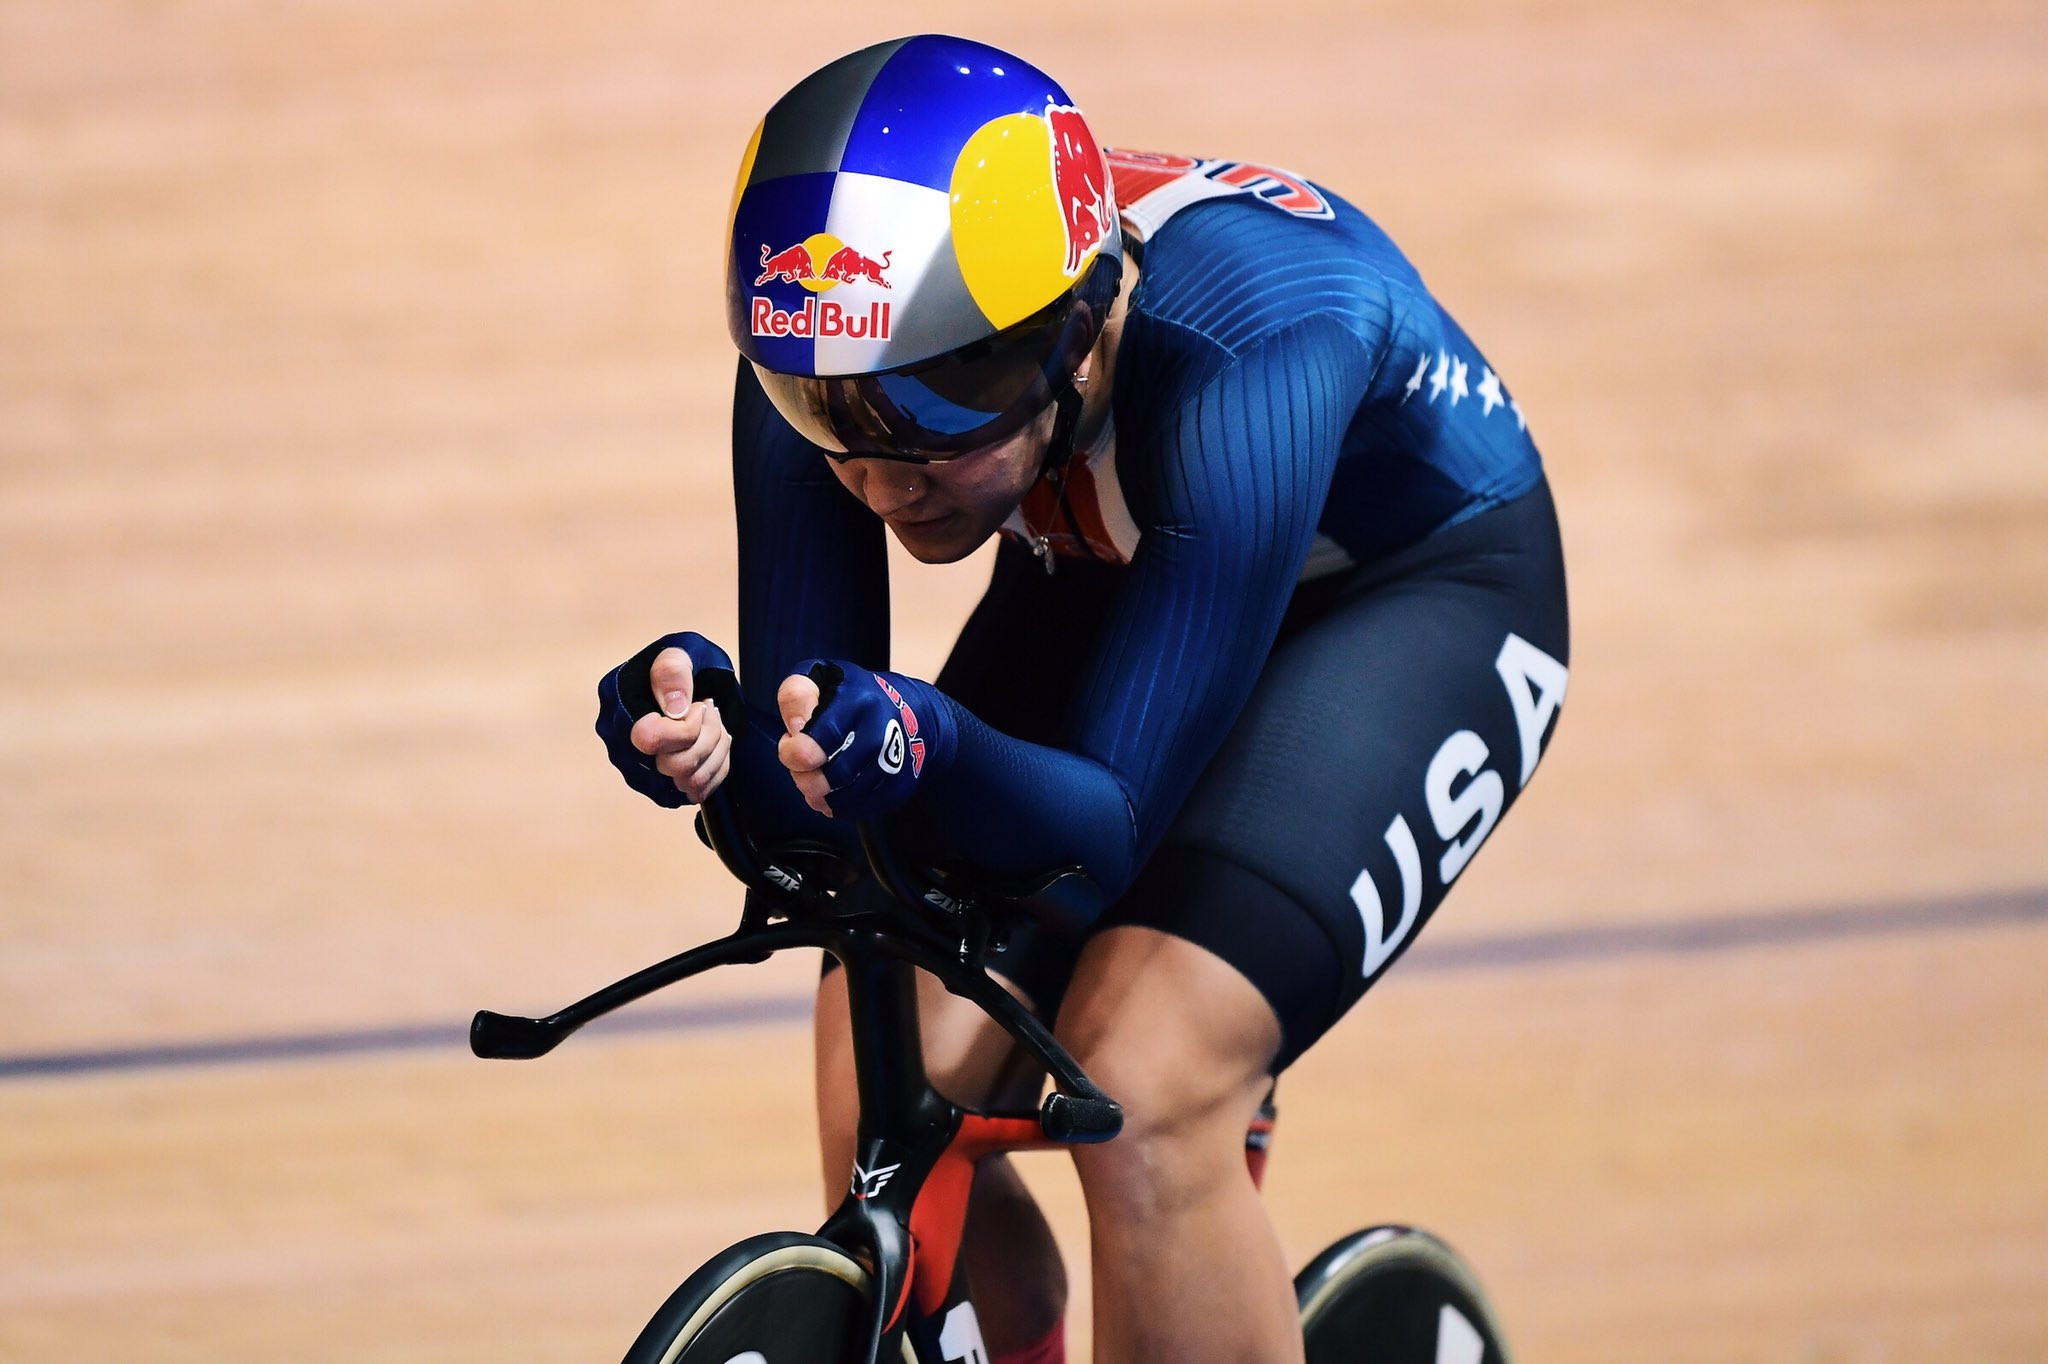 Dygert breaks world record twice on way to individual pursuit gold at World Track Cycling Championships